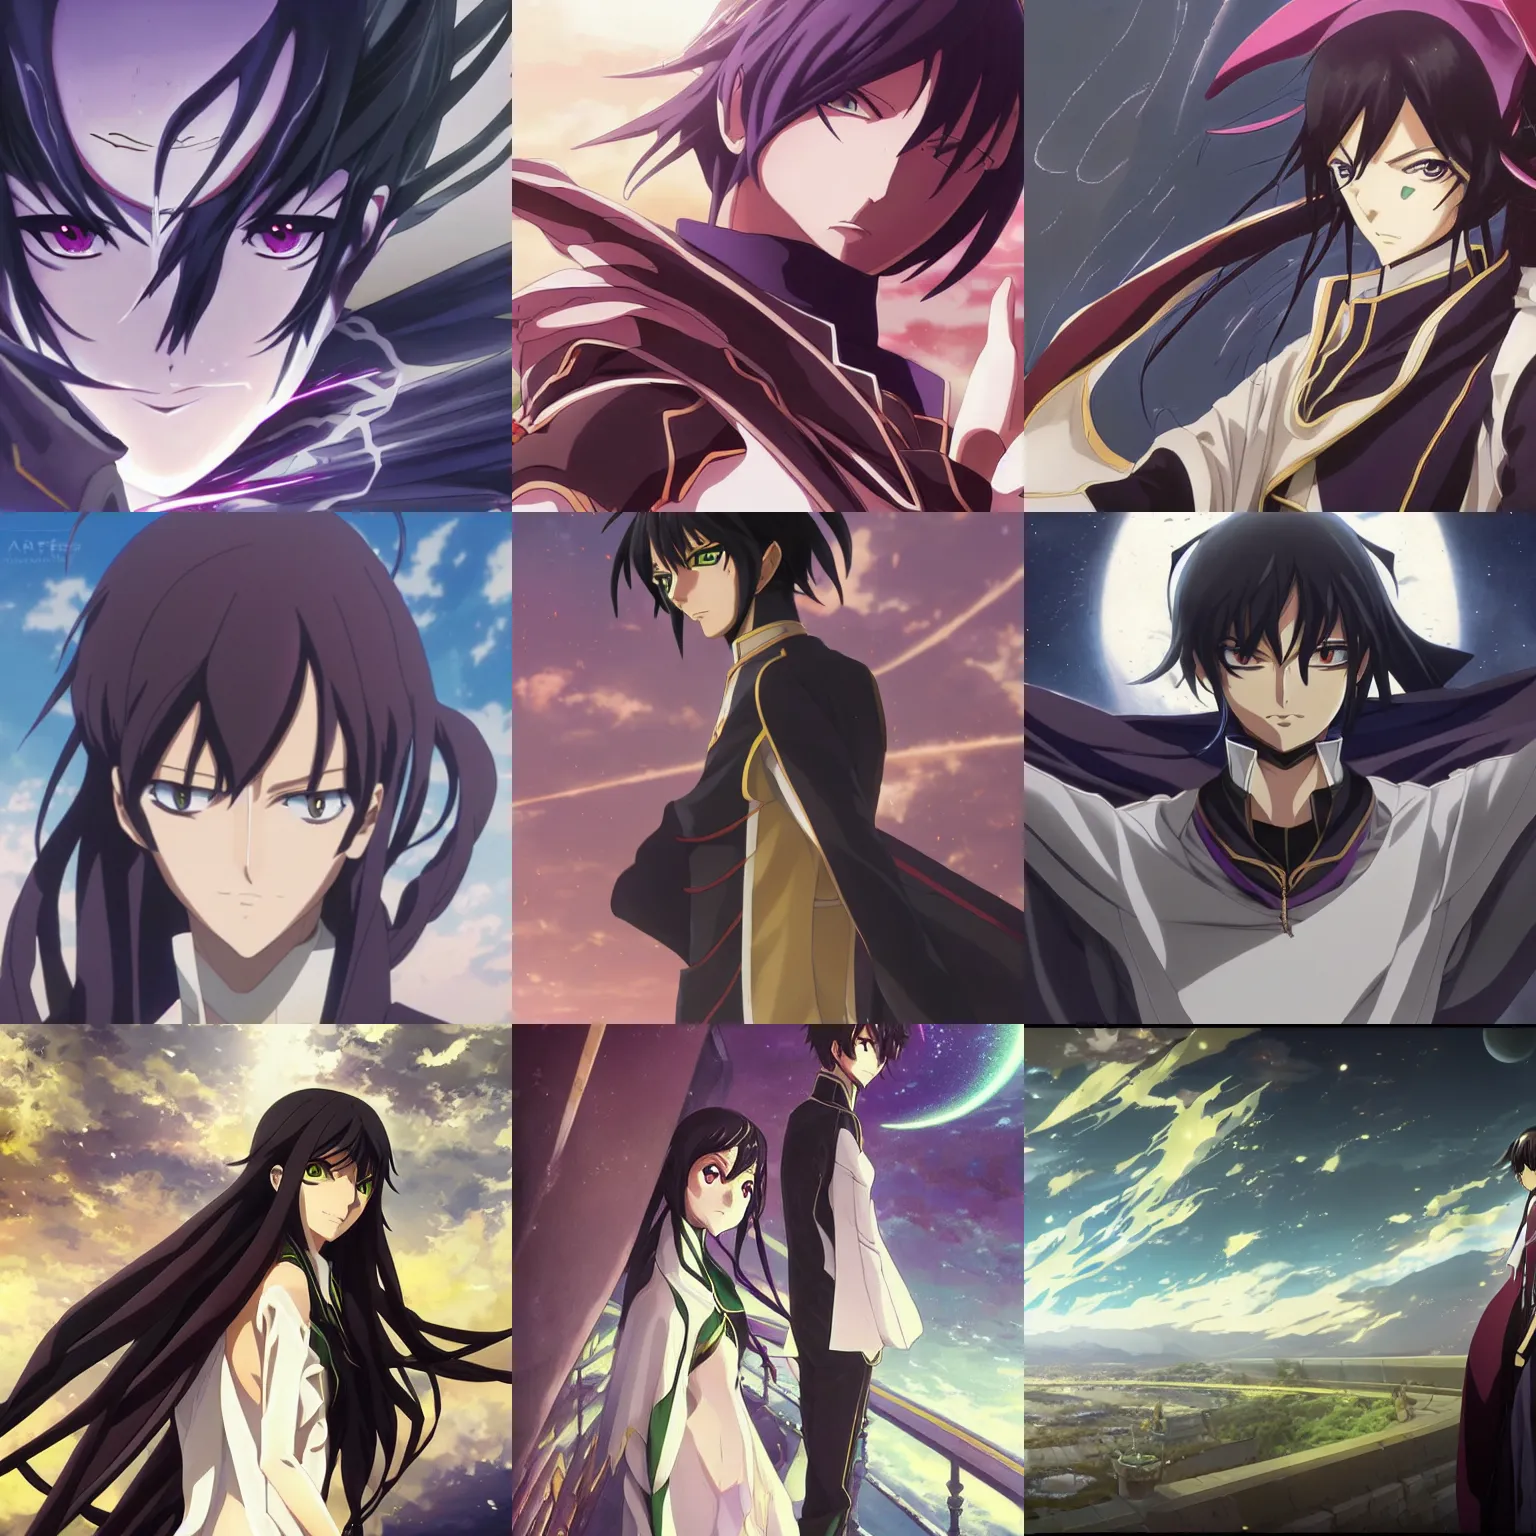 A beautiful key-anime visual of Lelouch Lamperouge